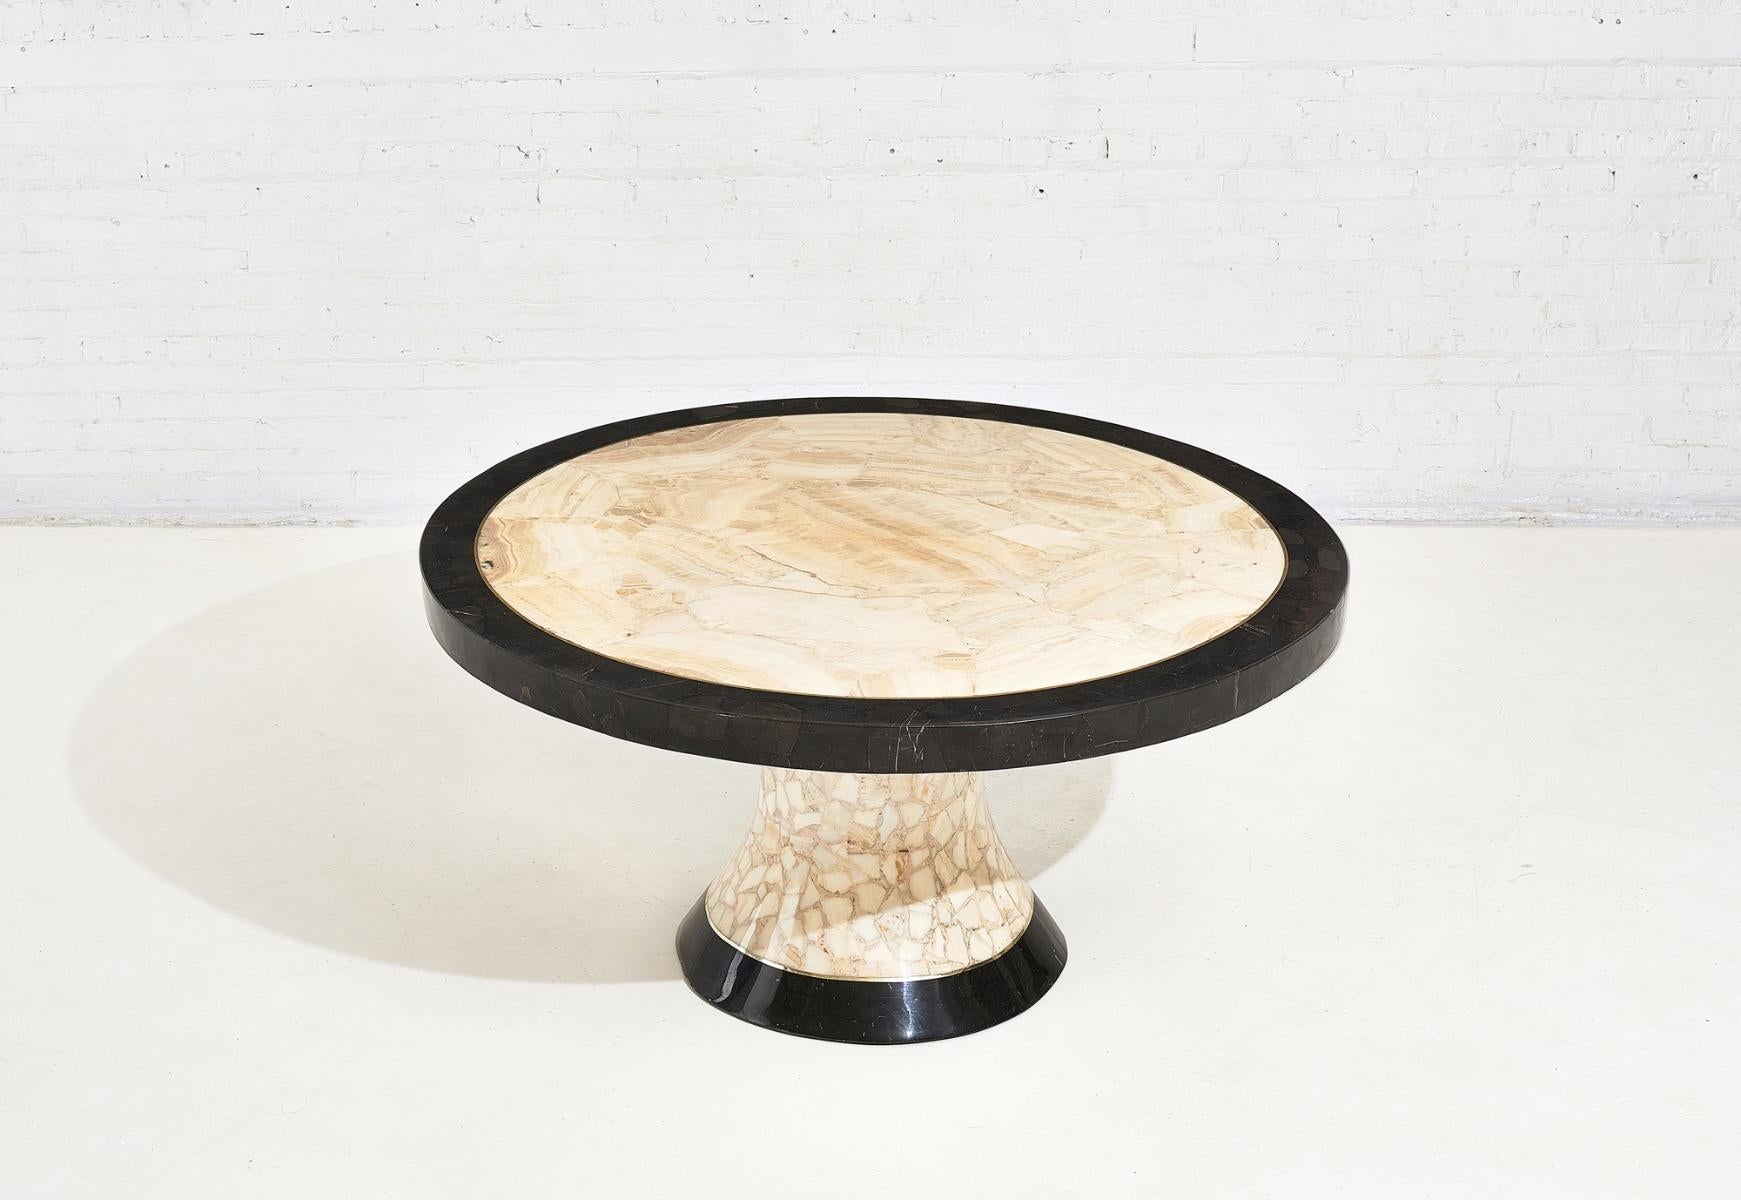 muller's onyx table